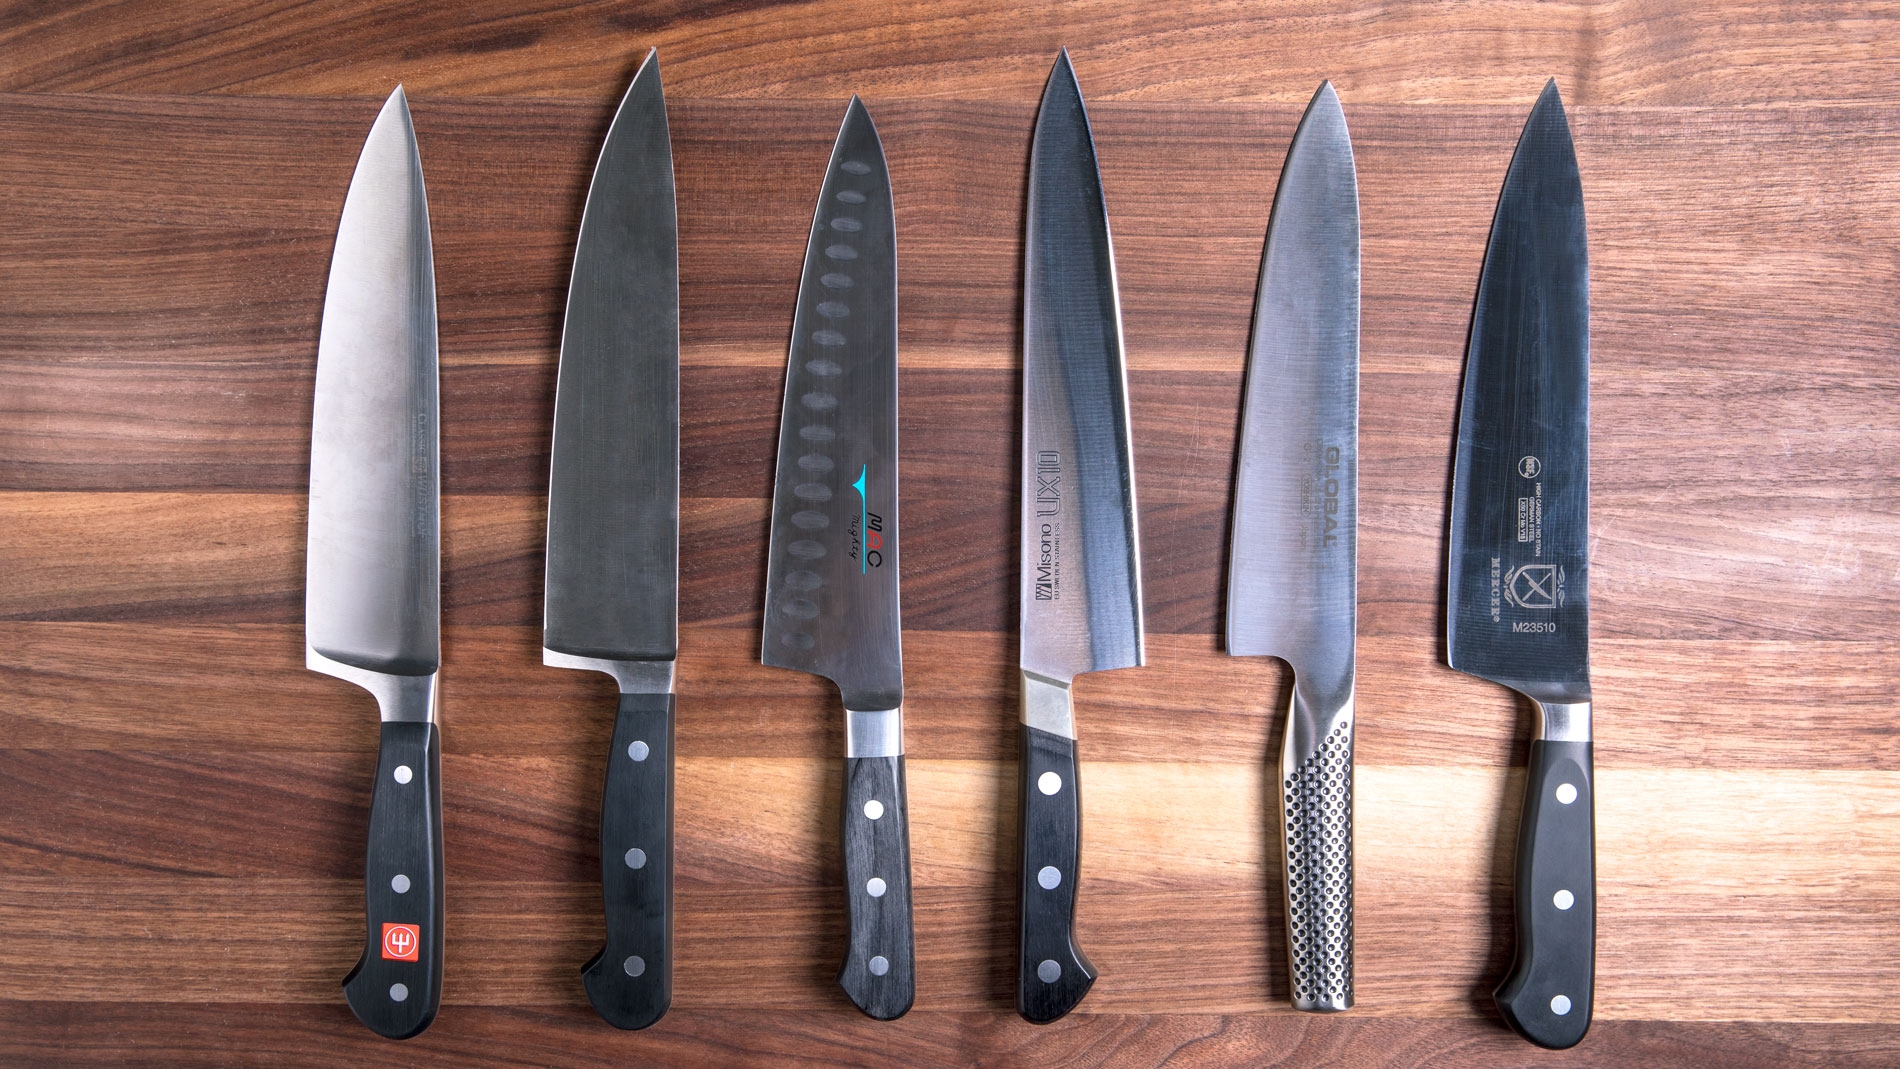 What are the best professional knives to buy?